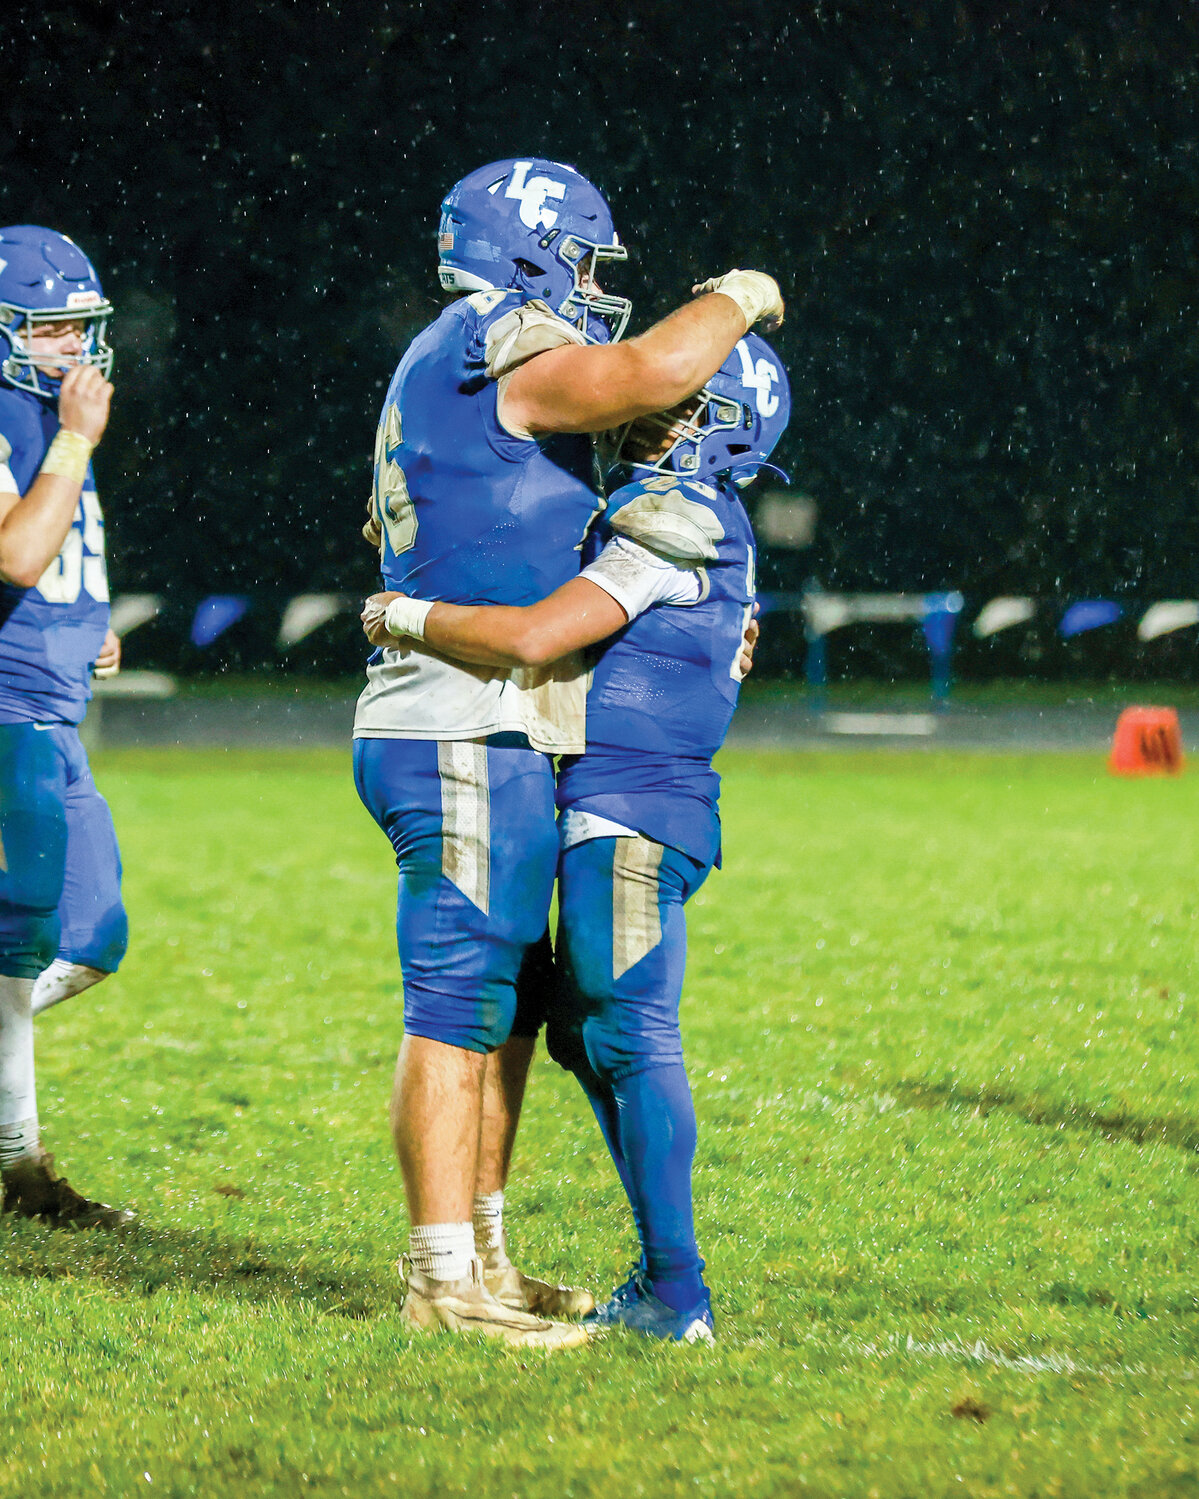 Wildcat seniors Ryan Kawalek, left, and Jalen Ward embrace each other after their season-ending, 21-7 loss to the Omak Pioneers on Friday, Nov. 10.